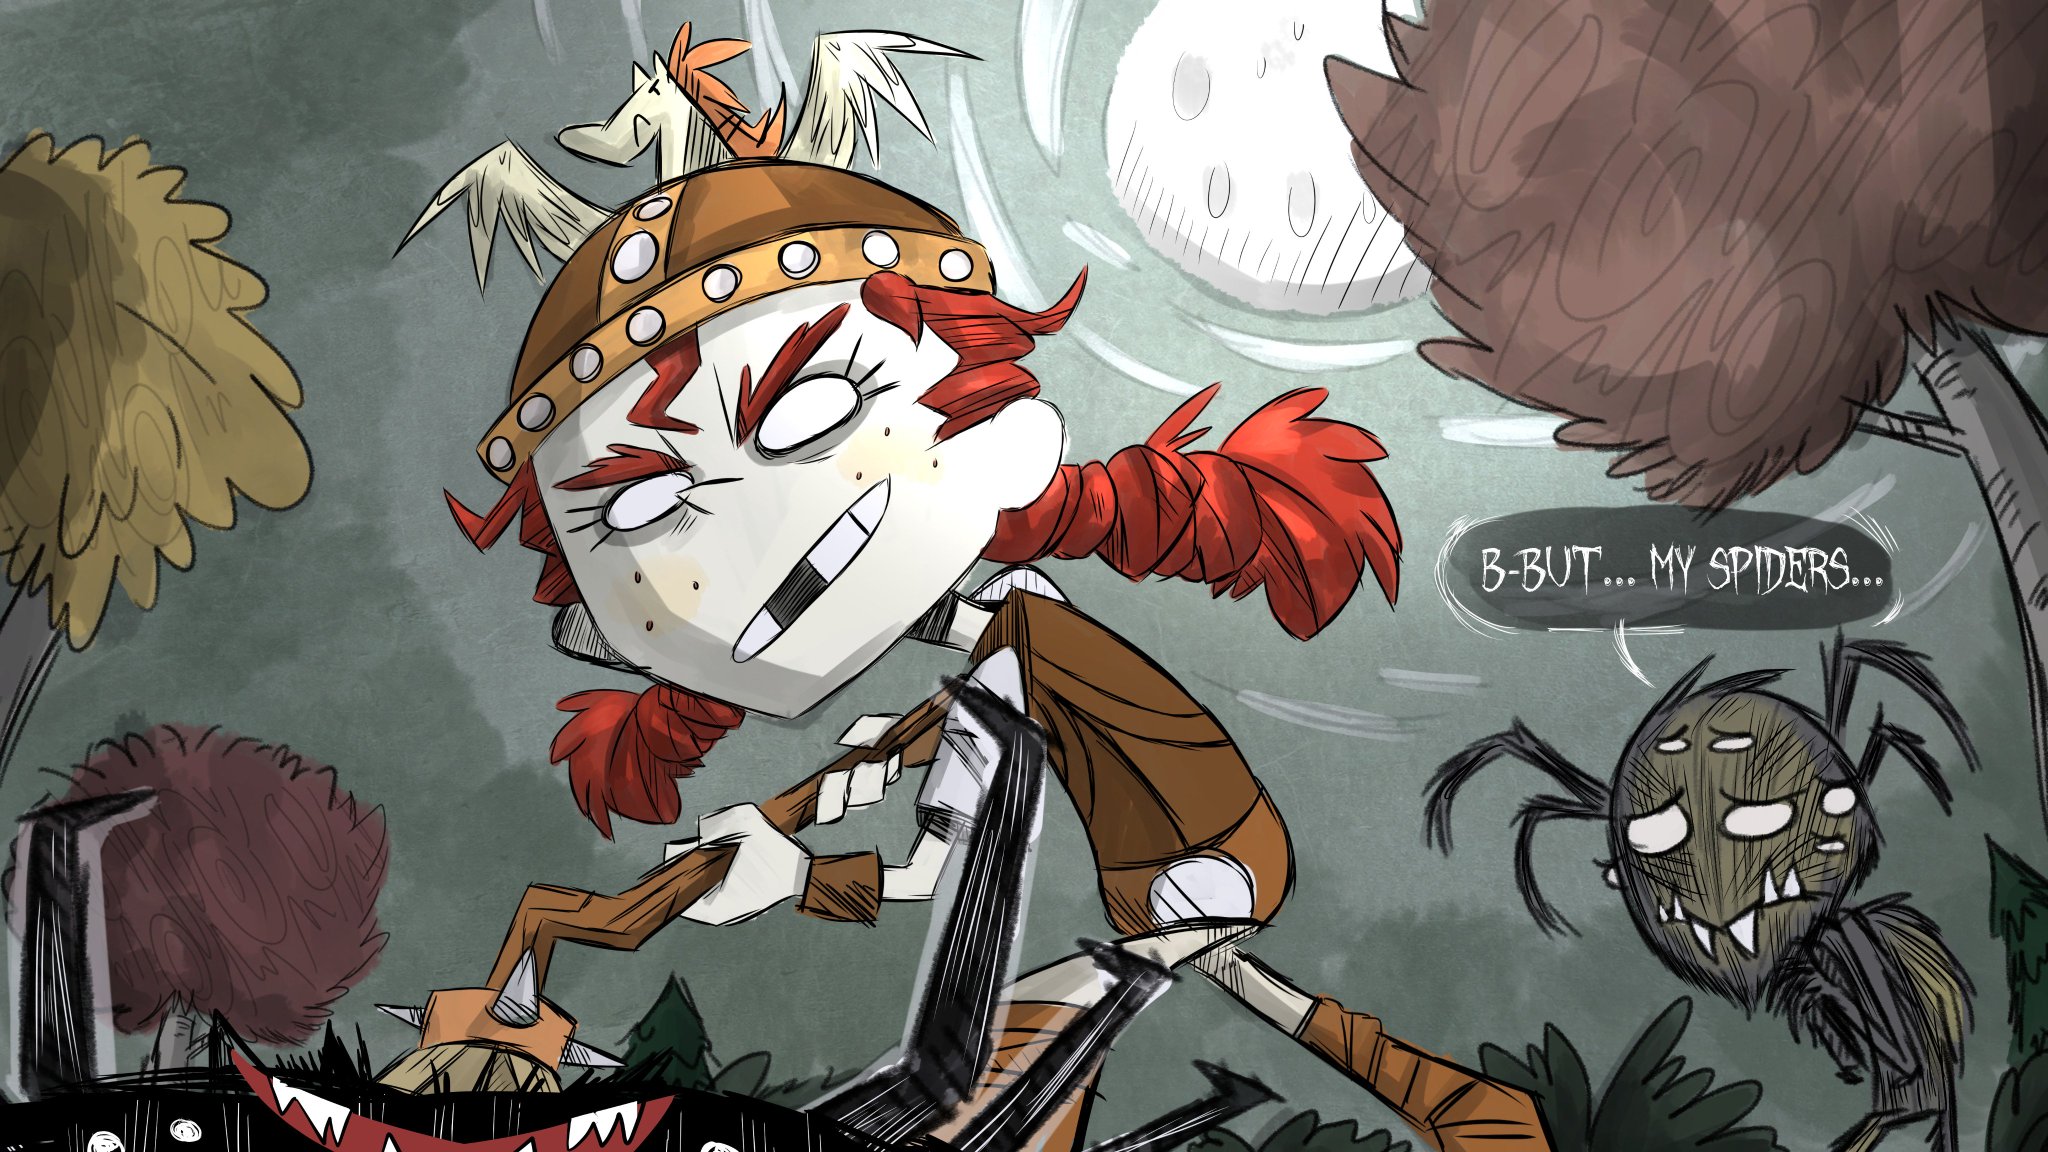 CoyoteRom on Twitter: "Some old Don't Starve fanart :) @klei #